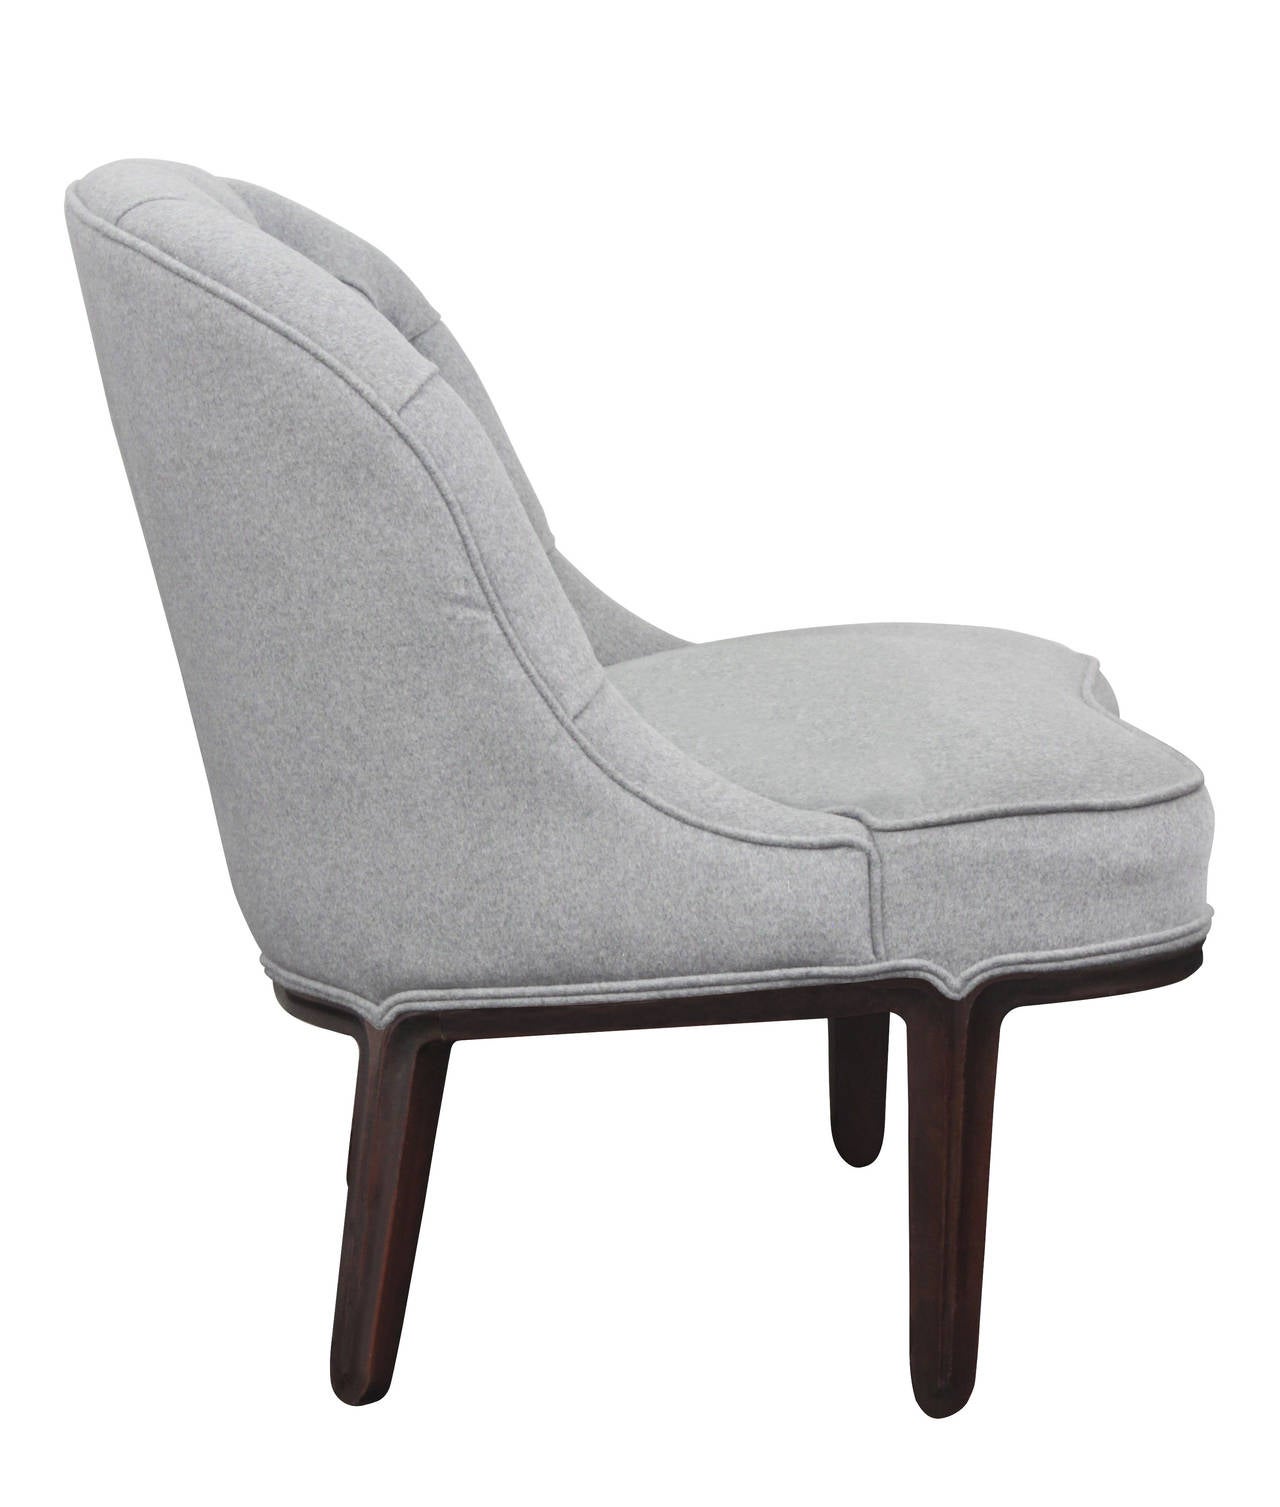 Pair of tufted-back slipper chairs model No. 5775 with sculpted walnut base by Edward Wormley for Dunbar, Janus Collection, American 1957.
Newly upholstered in gray flannel by Lobel Modern.